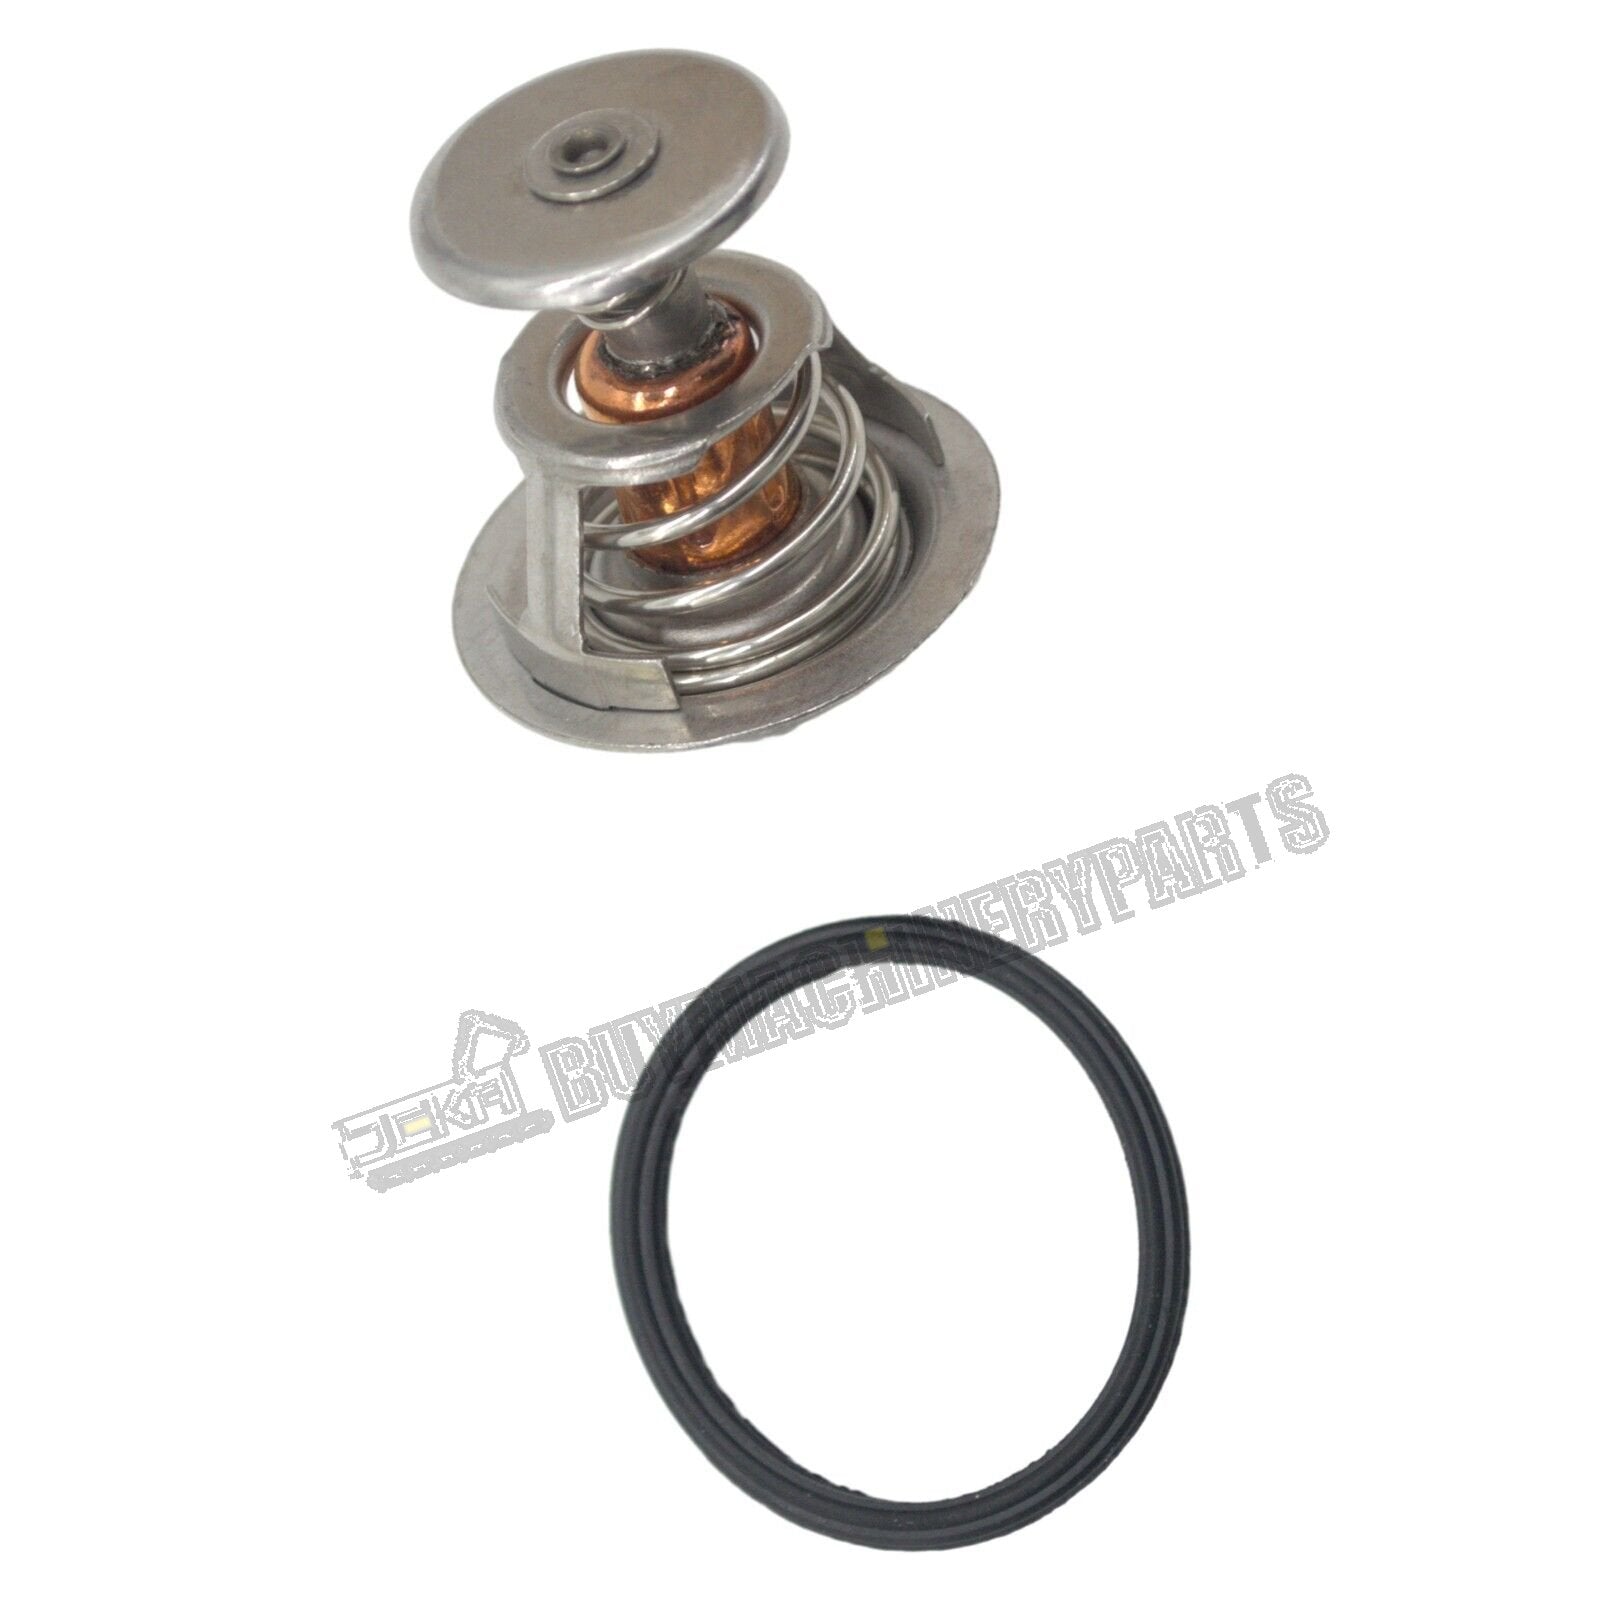 New Thermostat 121750-49800 Fit for Yanmar Marine Engine 2GMF 2GM20F 2GM20F-YEU